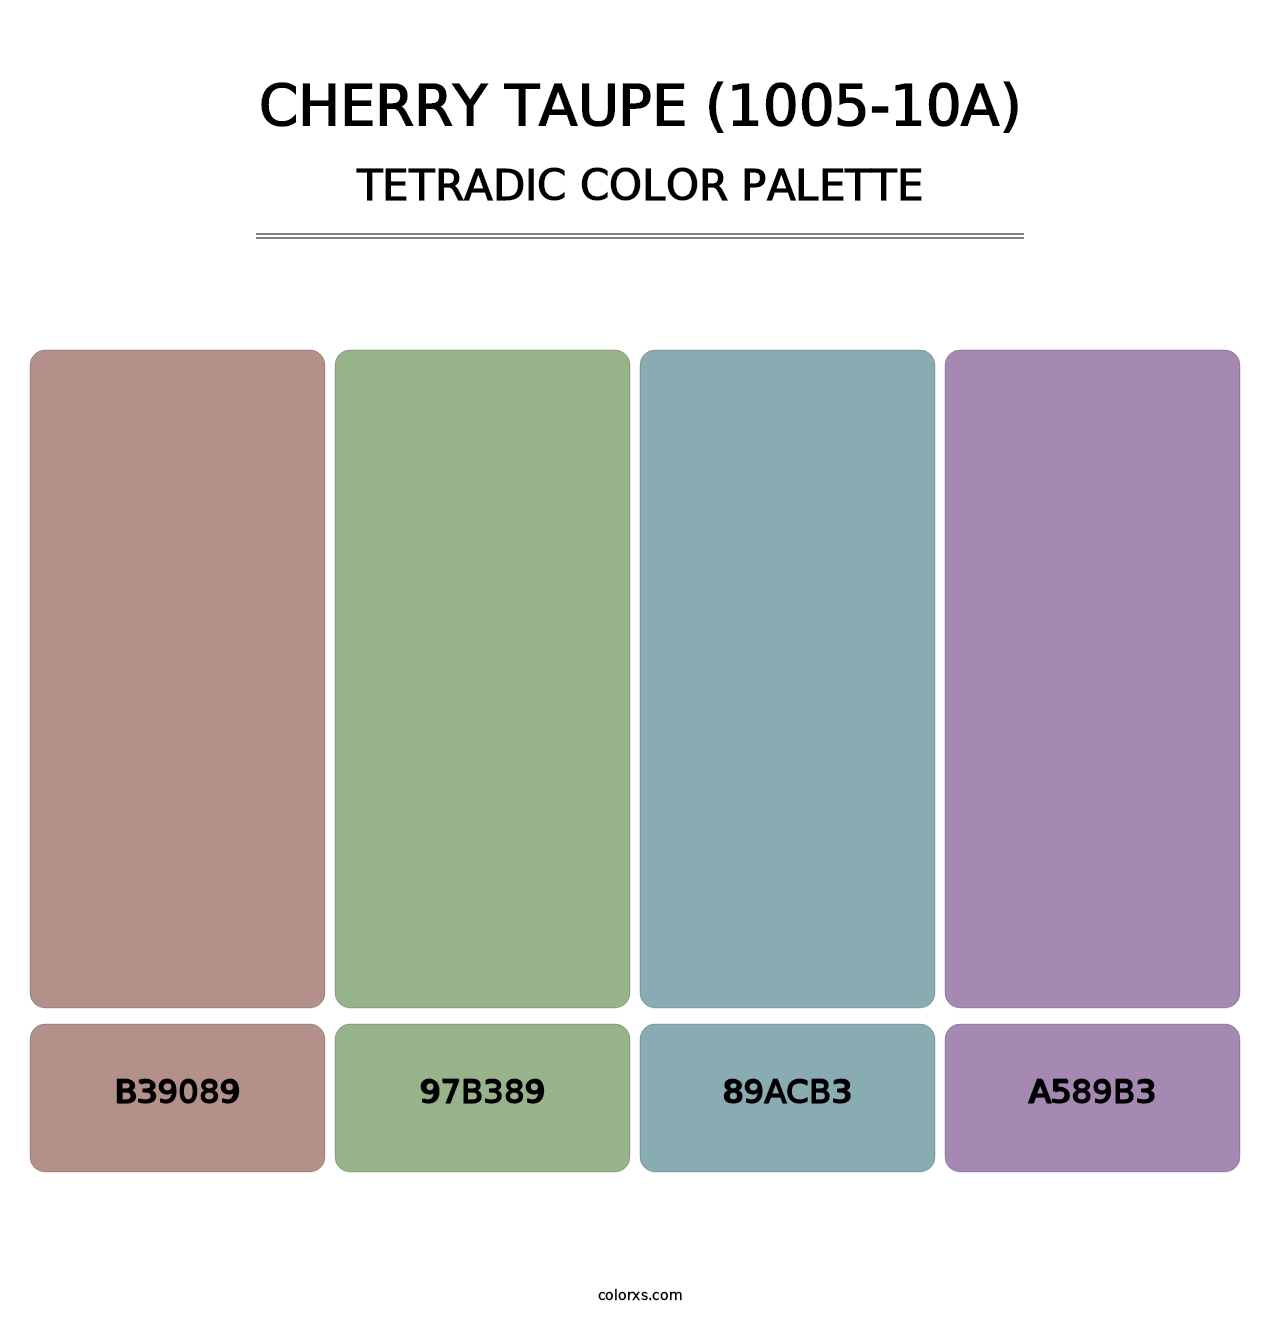 Cherry Taupe (1005-10A) - Tetradic Color Palette